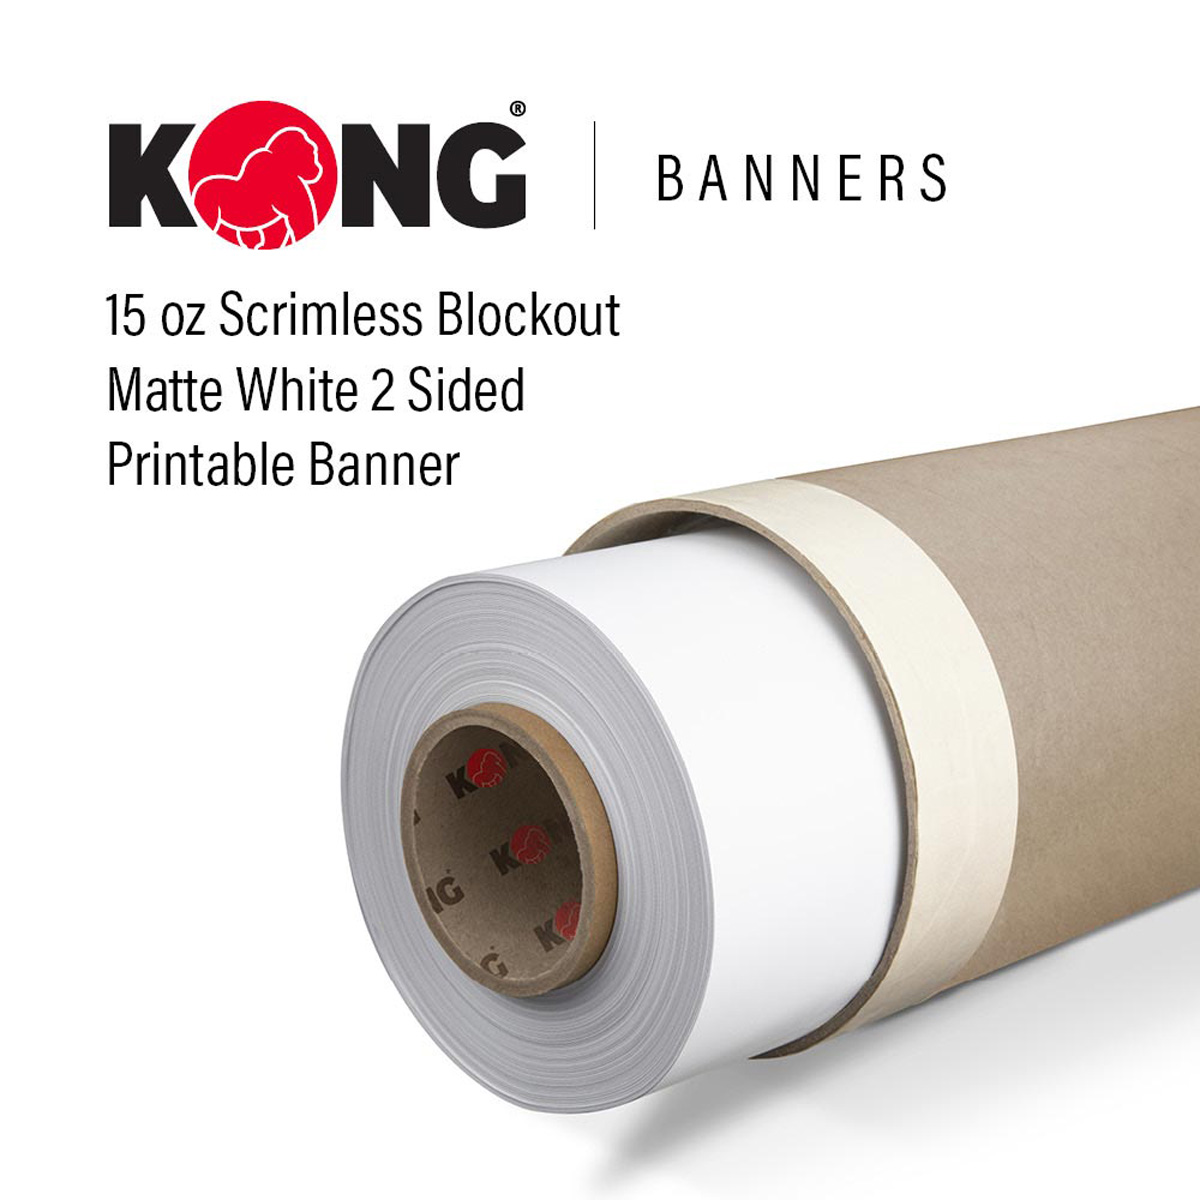 126'' x 165' Kong Banner - 15 OZ Scrimless Blockout Matte White 2 Sided Printable Banner